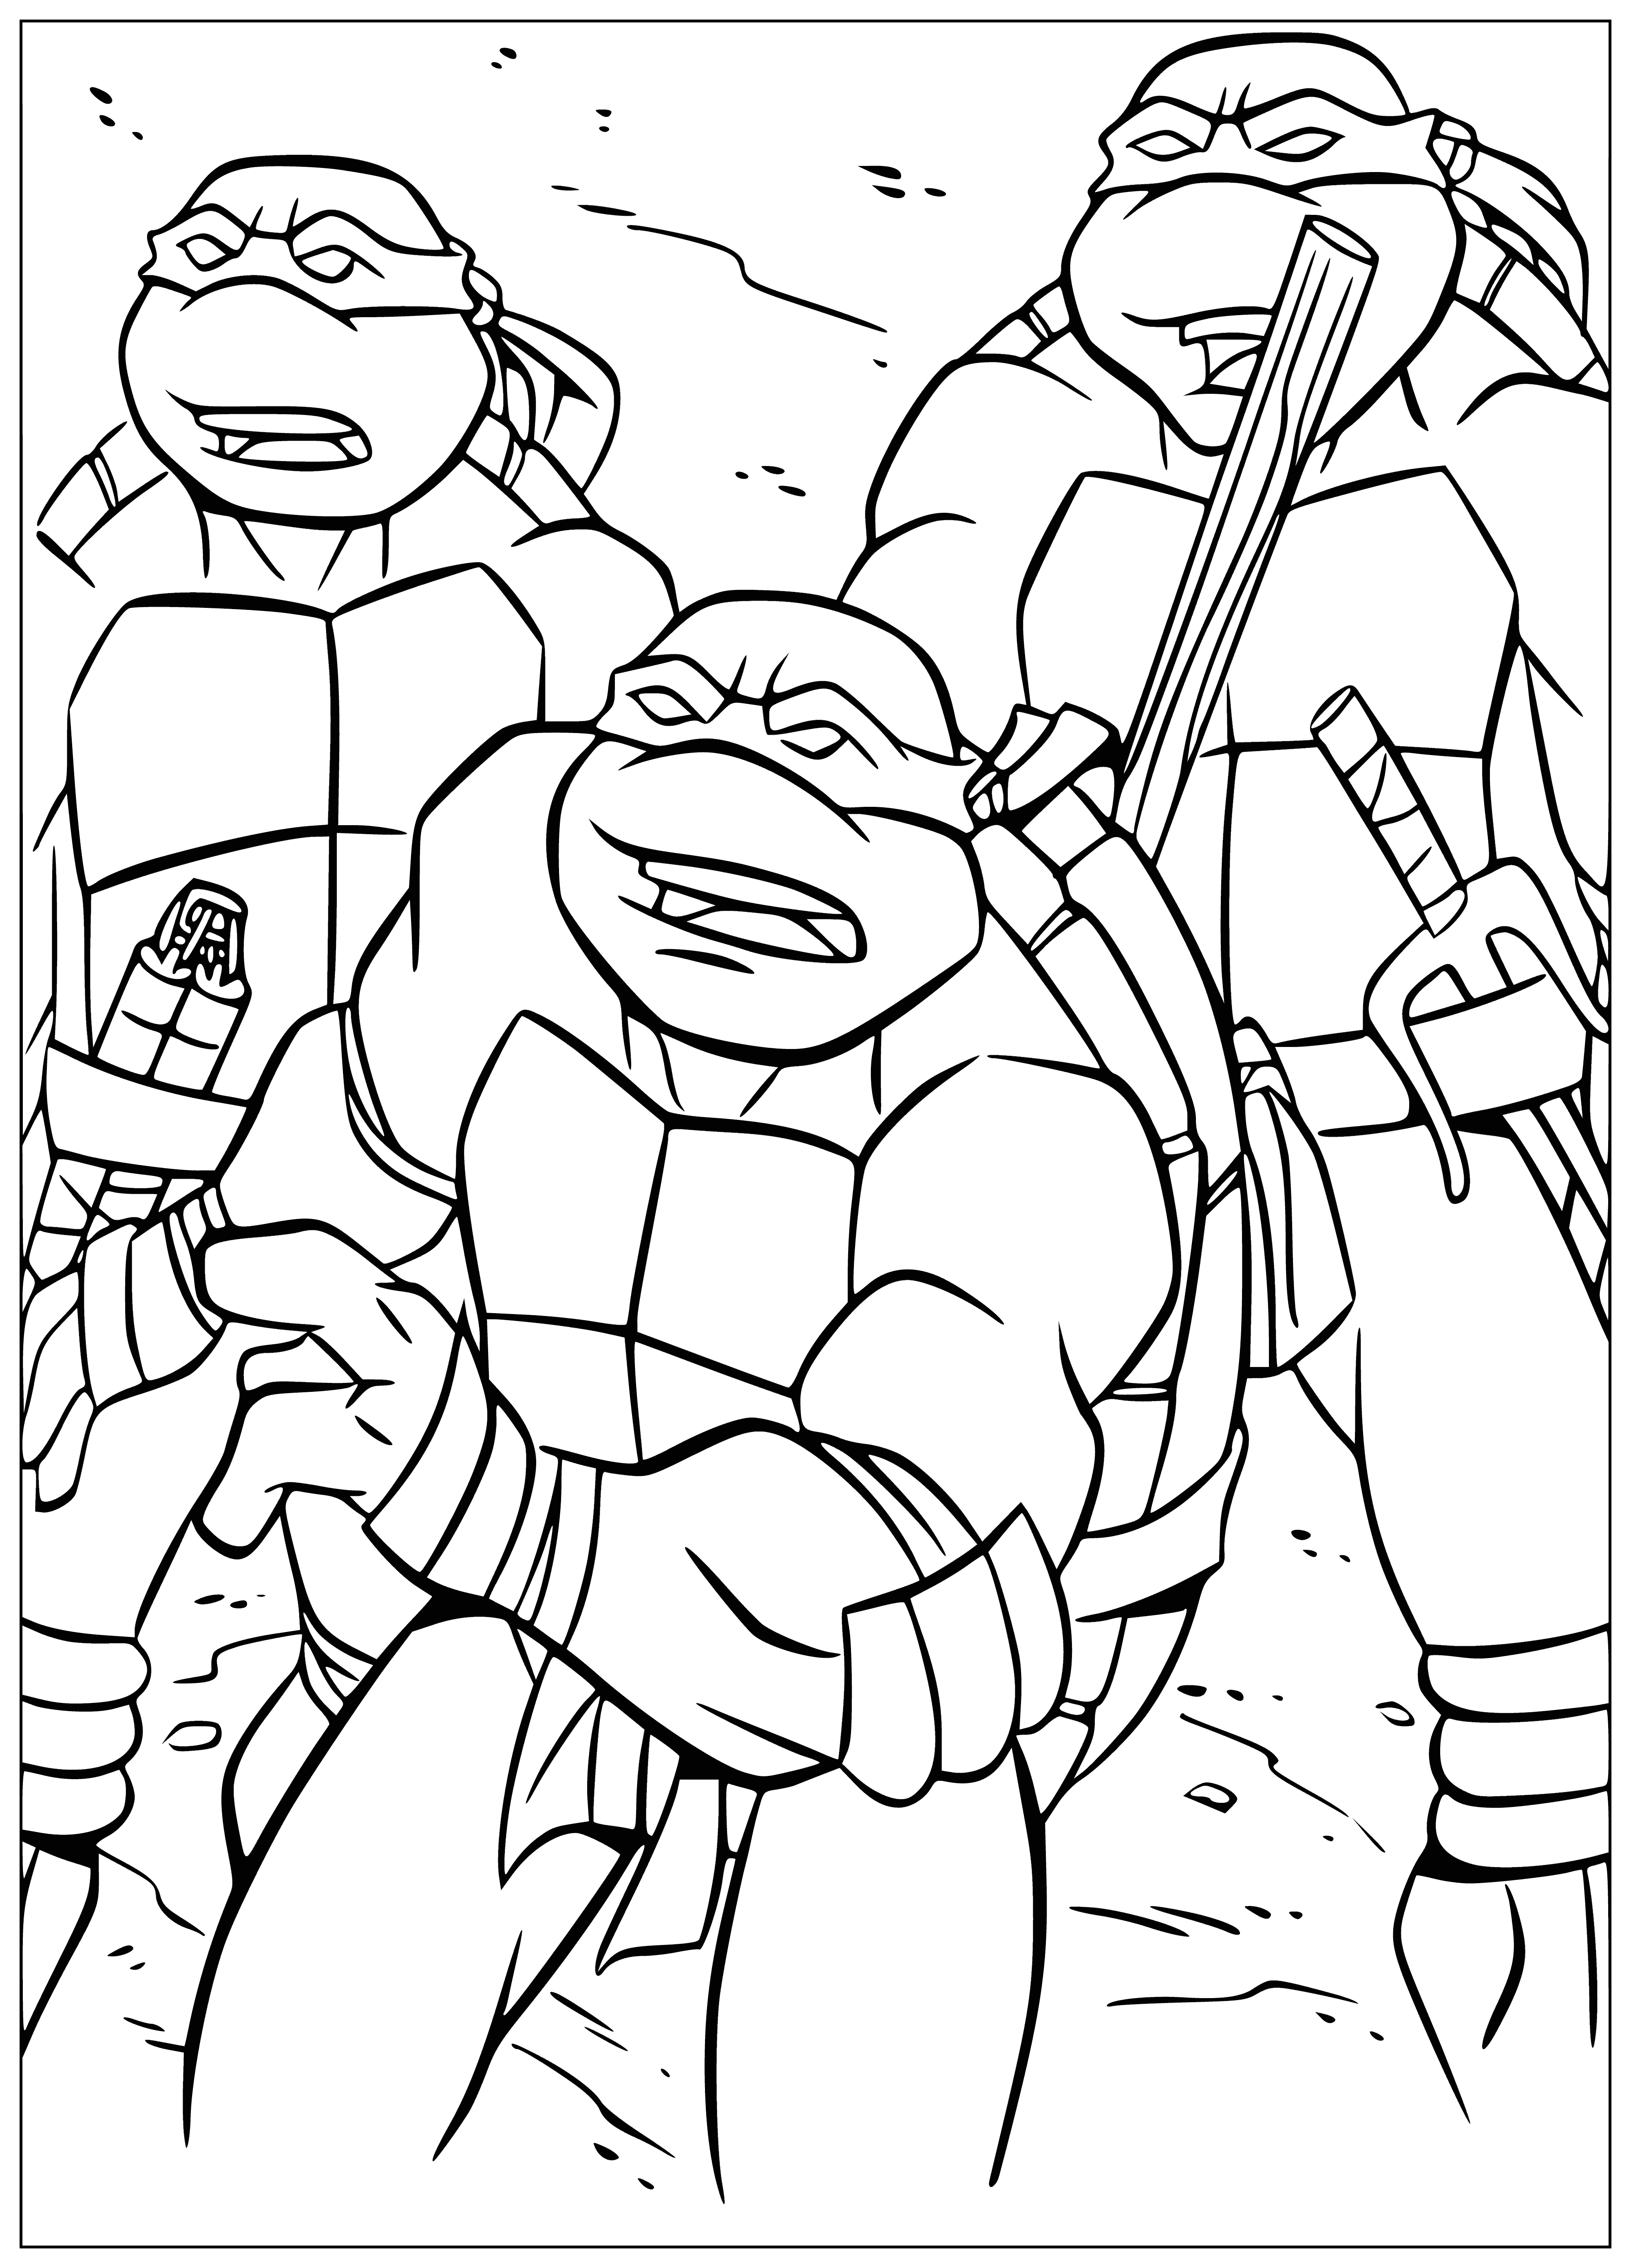 coloring page: Teenage mutant turtles living in NYC sewers fight crime with ninjutsu & protect city from villainous threats like Shredder & Baxter Stockman.